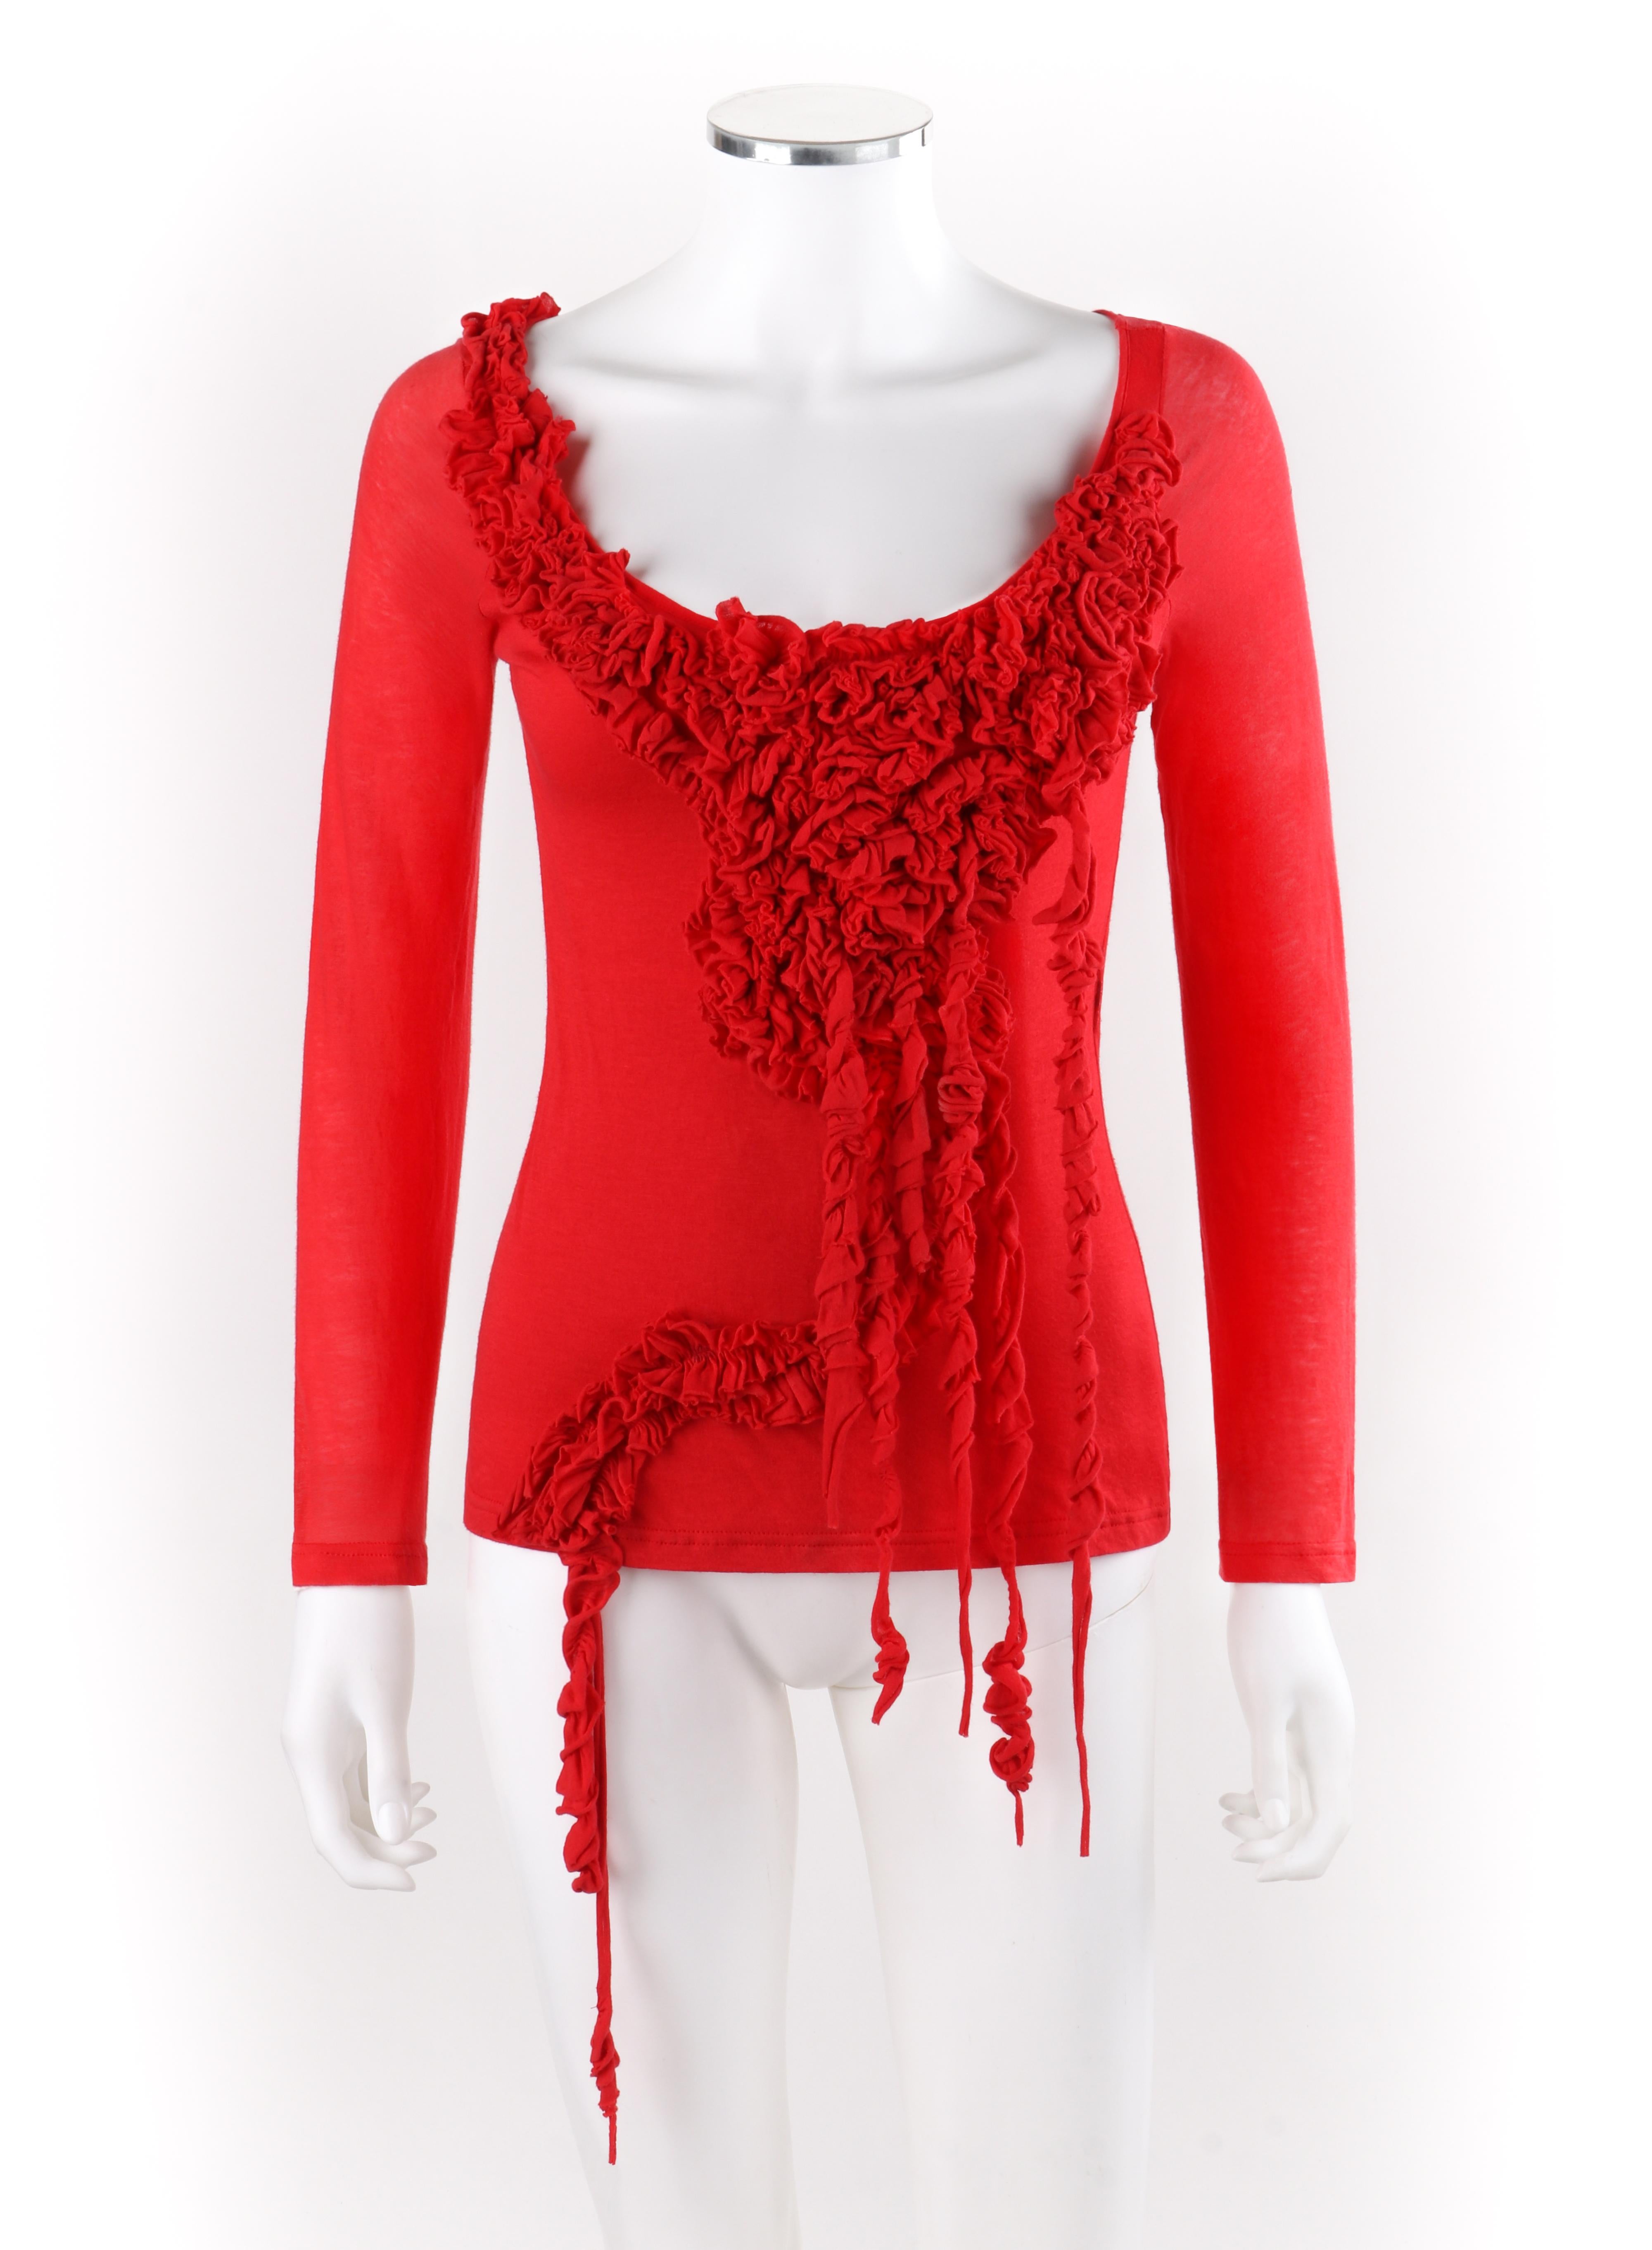 ALEXANDER McQUEEN A/W 2005 Red Long Sleeve Boat/Scoop Neck Flower Ruffle Top 
 
Brand / Manufacturer: Alexander McQueen
Collection: A/W 2005 
Style: Long sleeve shirt
Color(s): Red
Lined: No
Marked Fabric Content: 100% cotton
Additional Details /